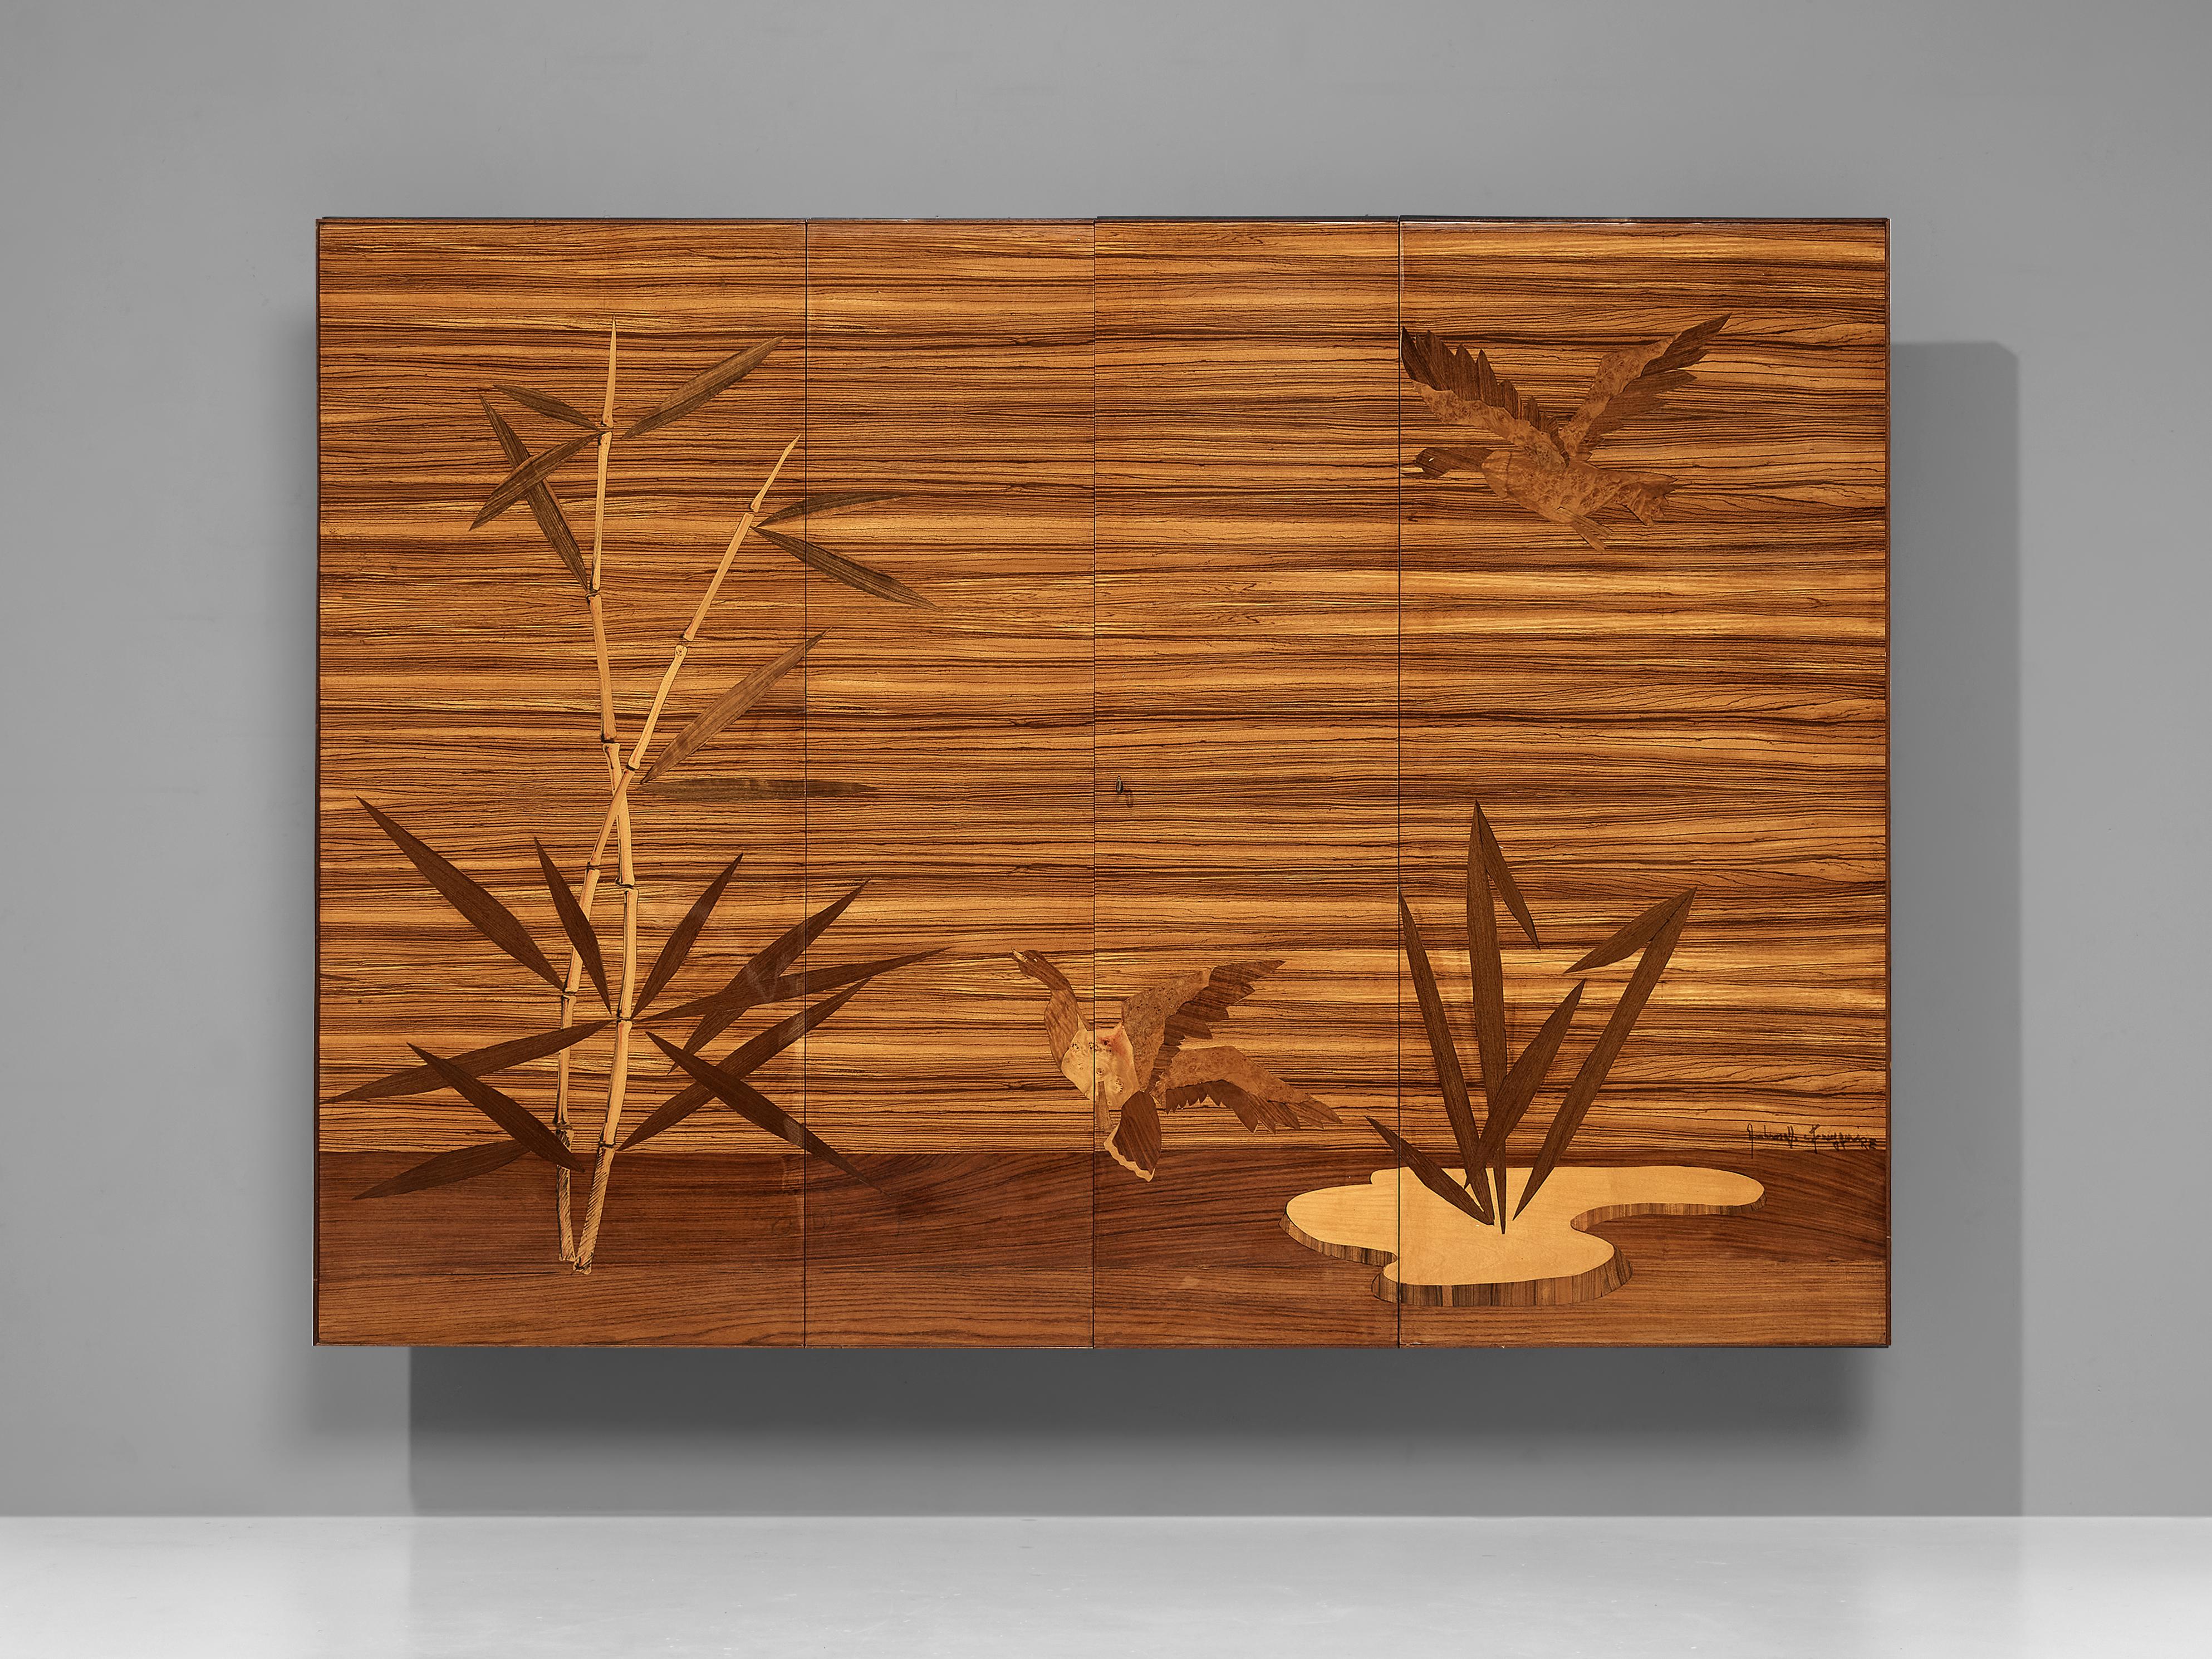 Wall-mounted cabinet, maple, walnut, wengé, brass, Italy, 1960s

A scenic marquetry highlights this elegant wall-mounted cabinet. The large front features two flying birds in a picturesque surrounding. The gooses have their wings spread and fly into